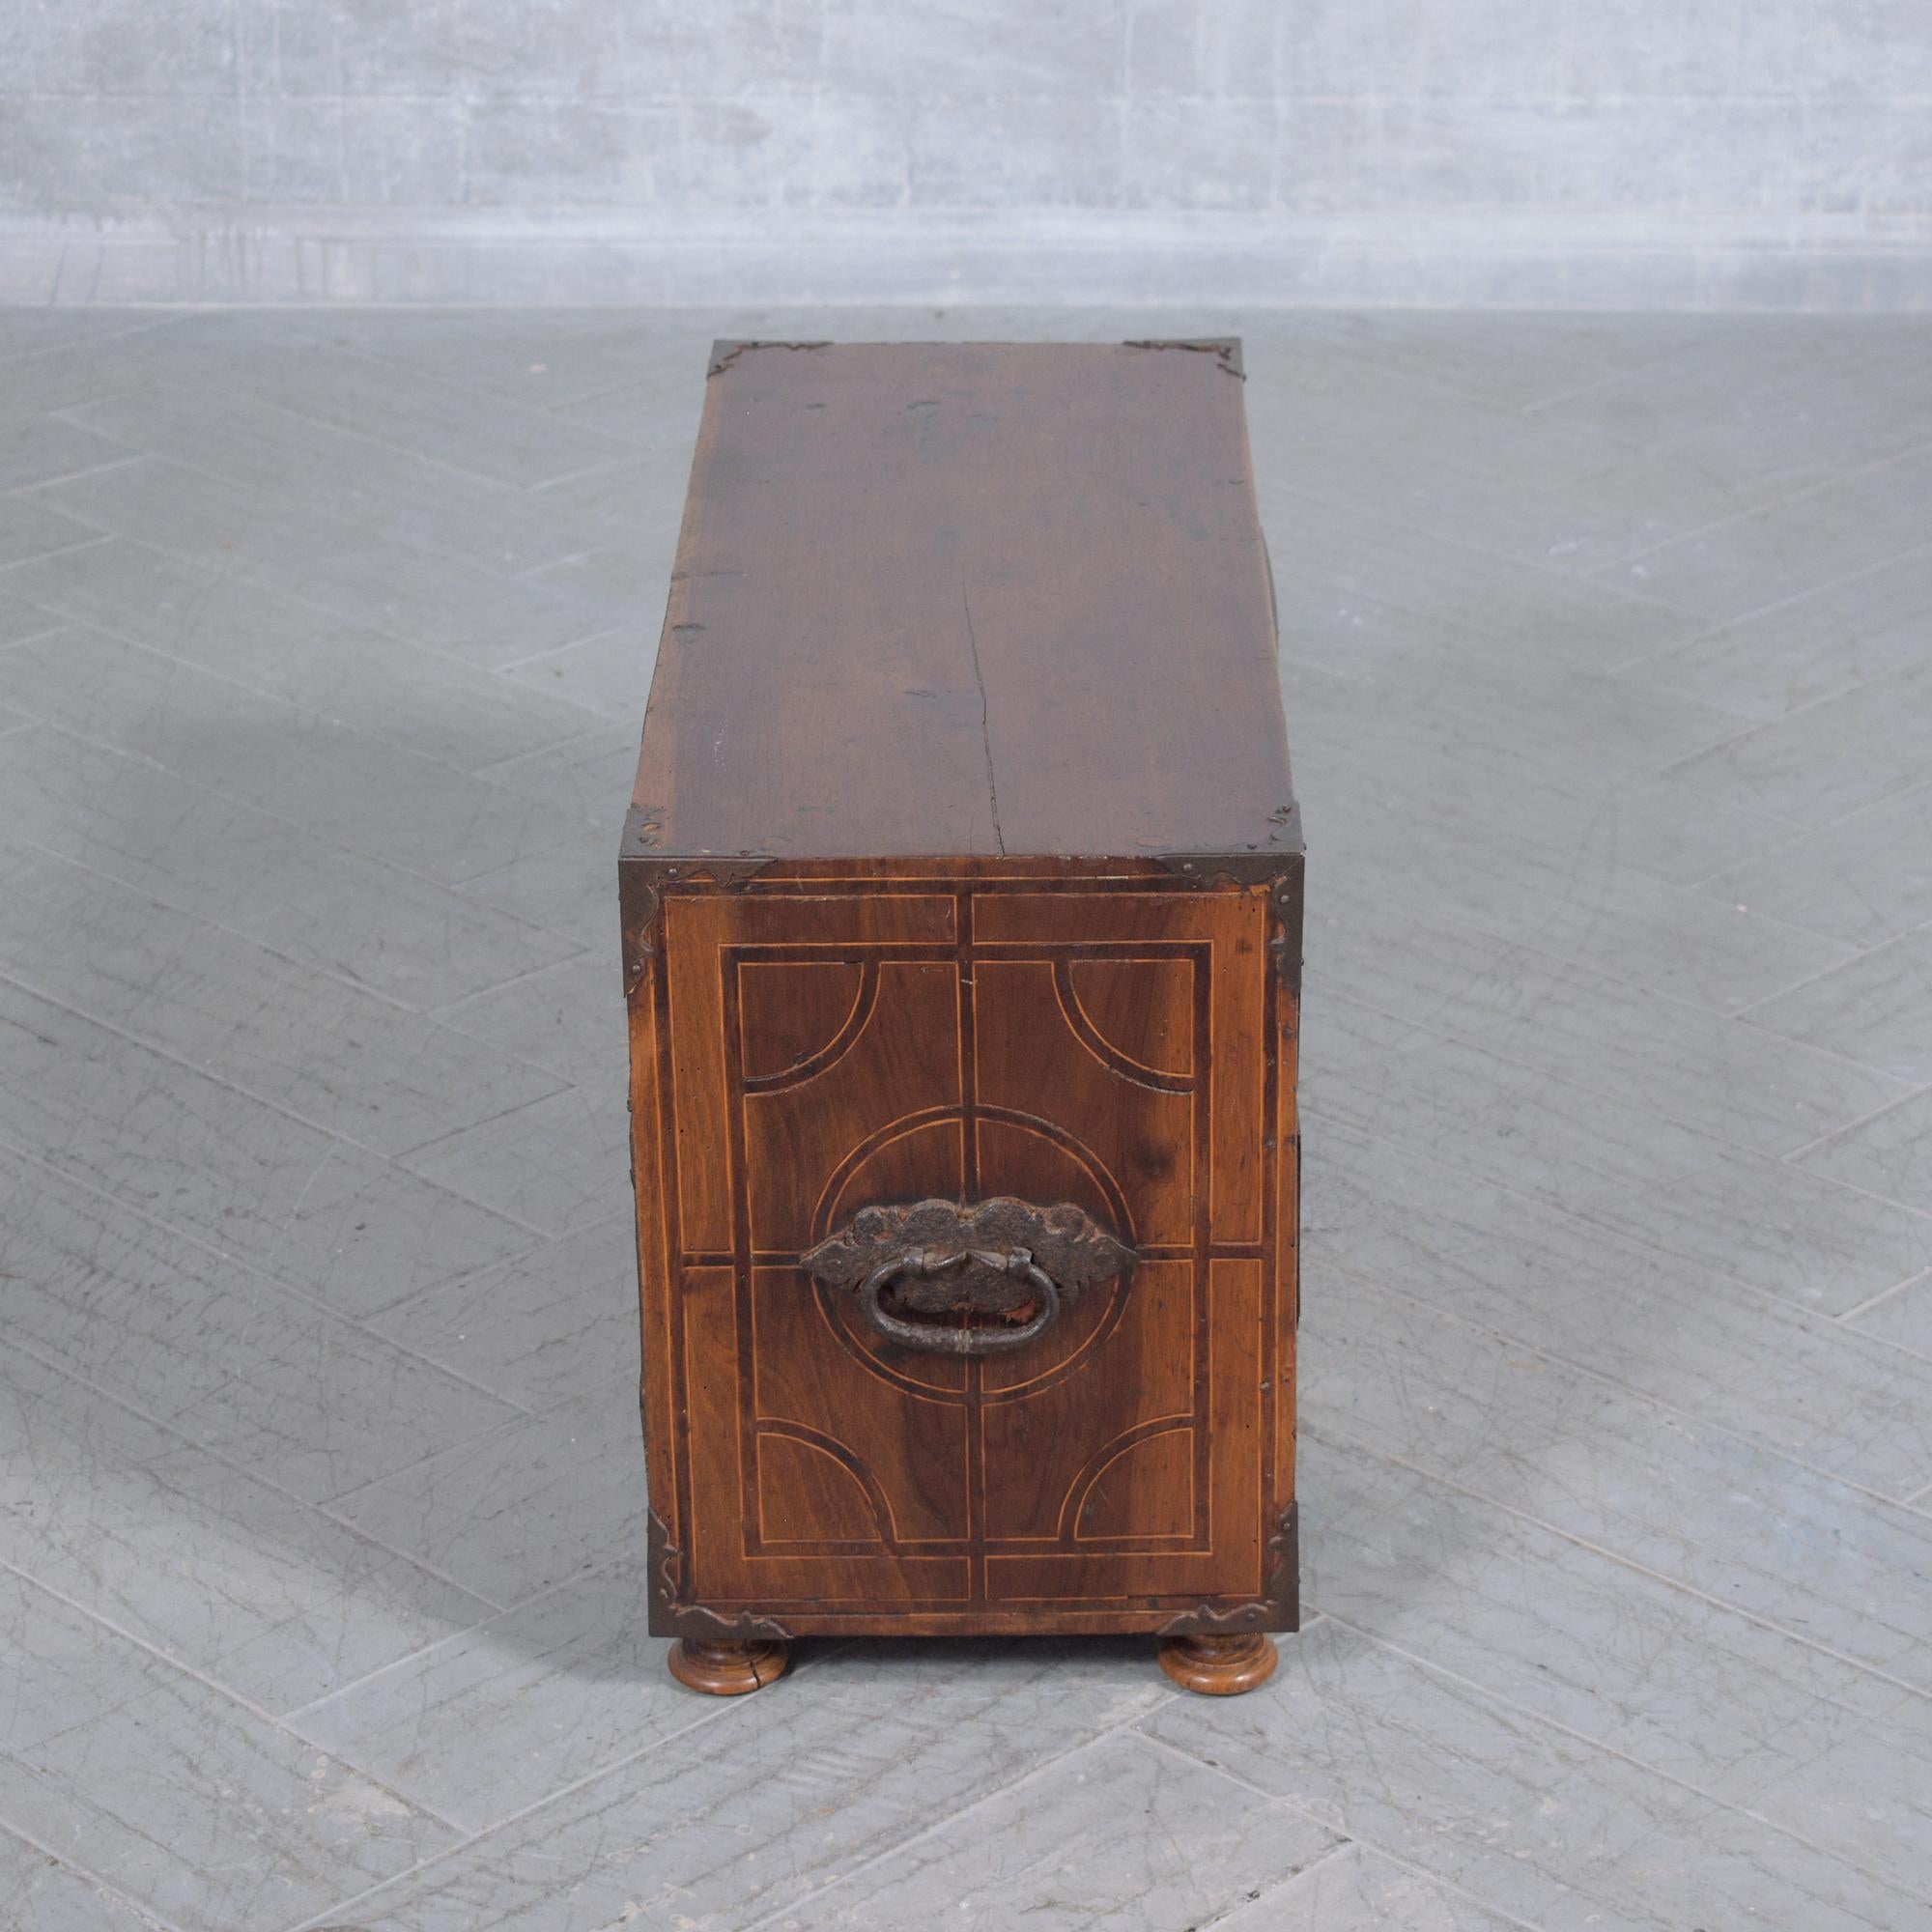 Exquisite 18th-Century Spanish Bargueño Cabinet: Walnut with Marquetry Inlays For Sale 2